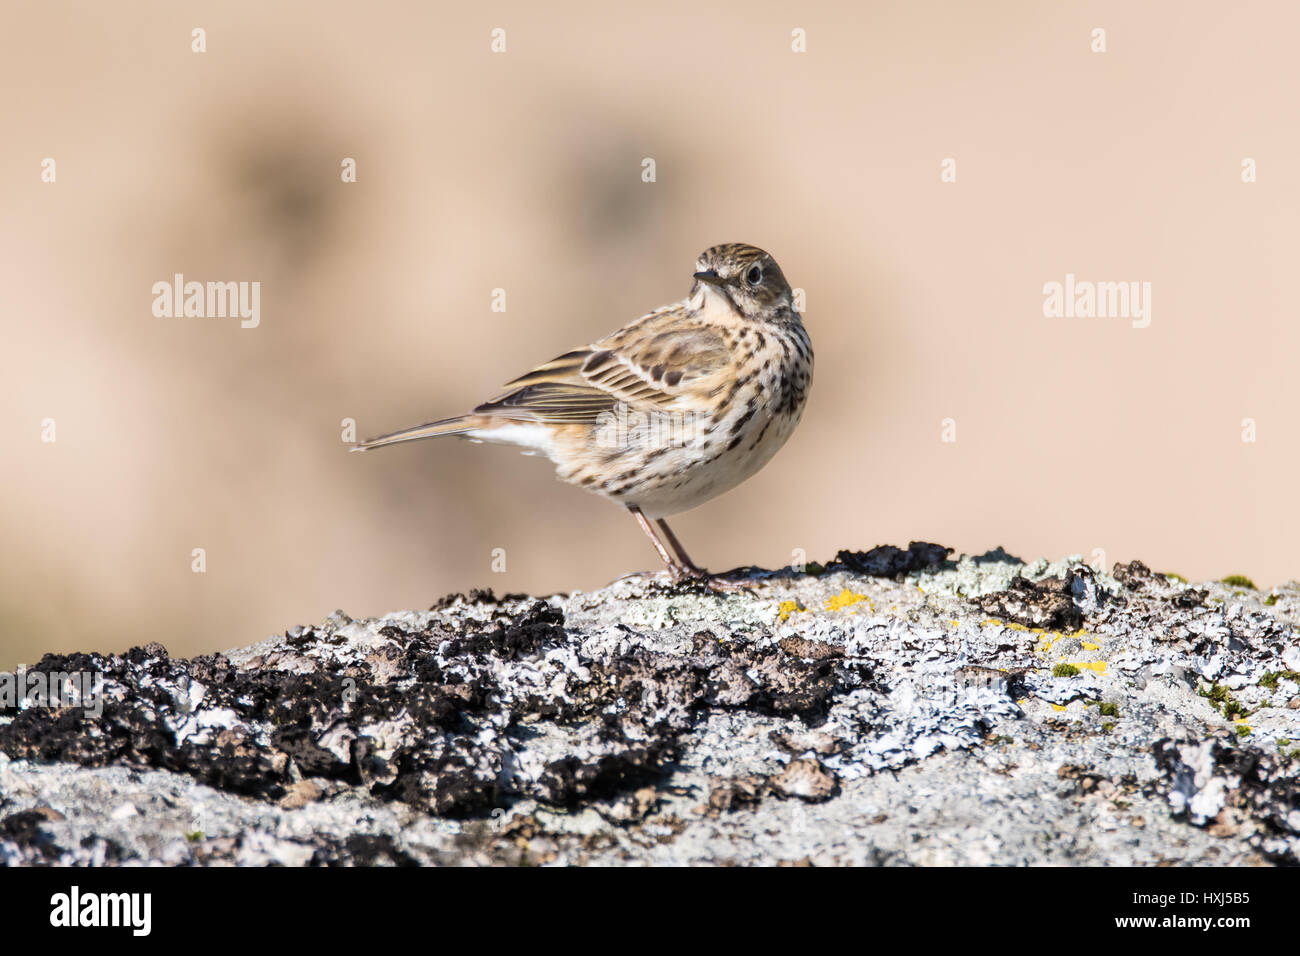 Meadow pipit (Anthus pratensis) on rock head on. Small brown songbird in the family Motacillidae, perched on rock in Dartmoor Narional Park, Devon, UK Stock Photo